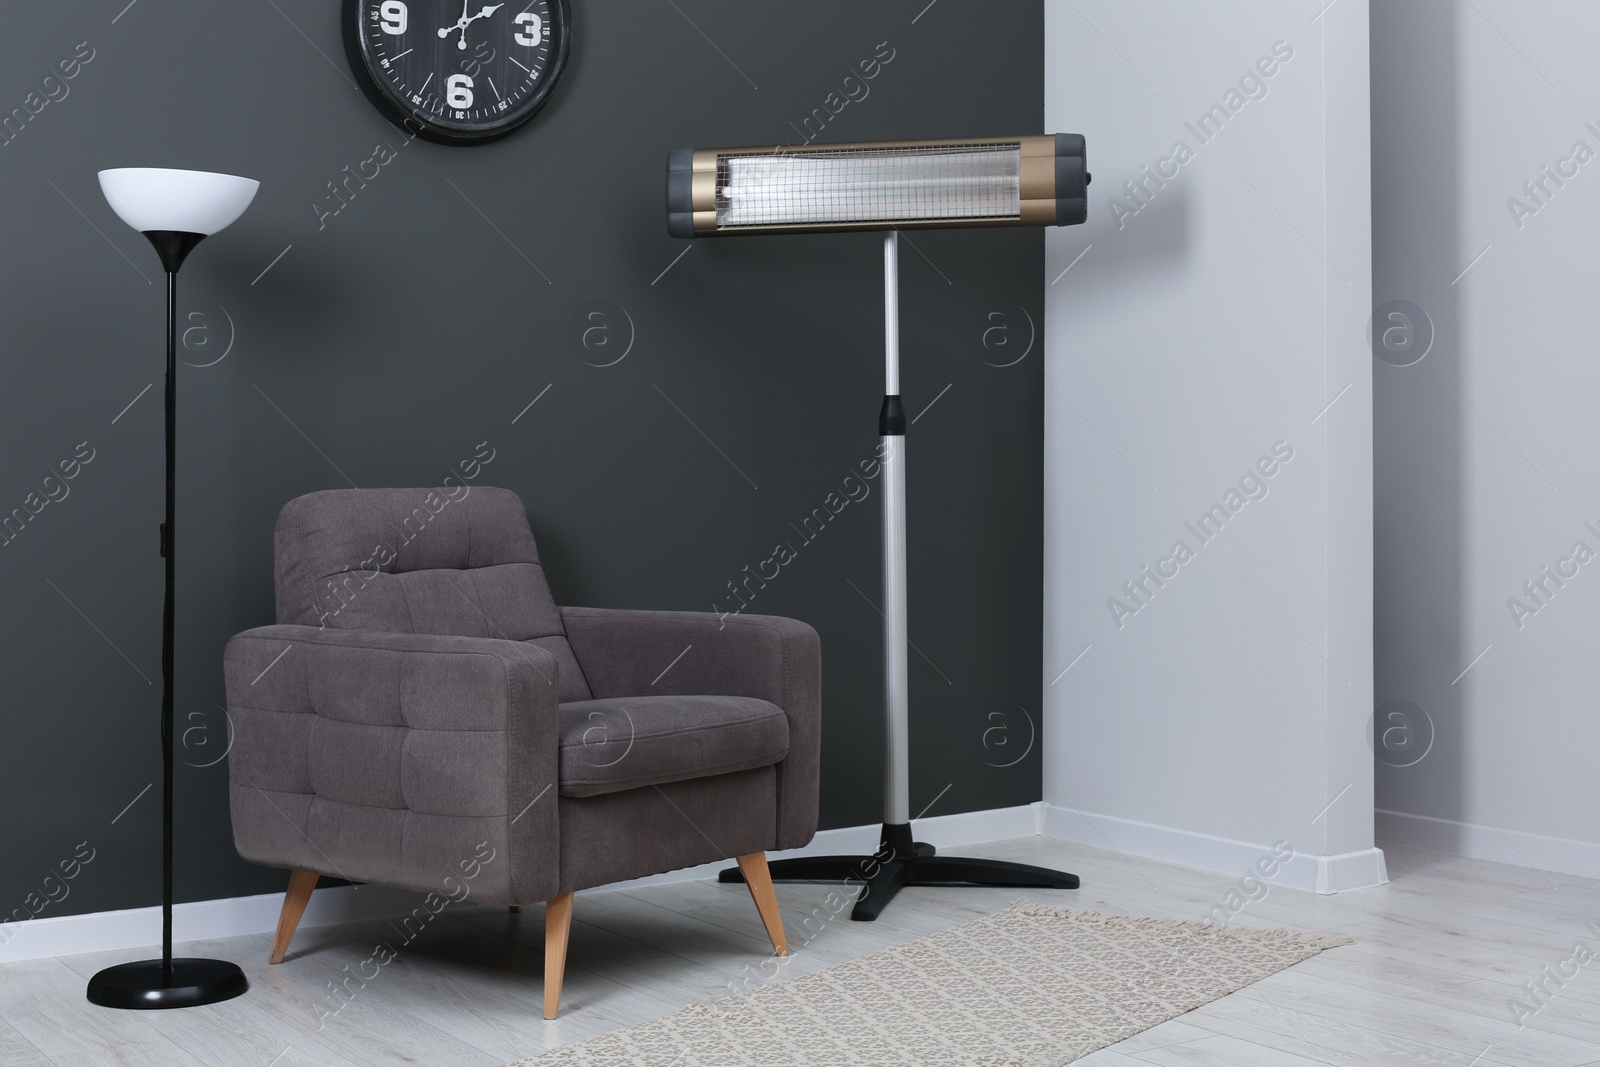 Photo of Electric infrared heater and stylish armchair in room